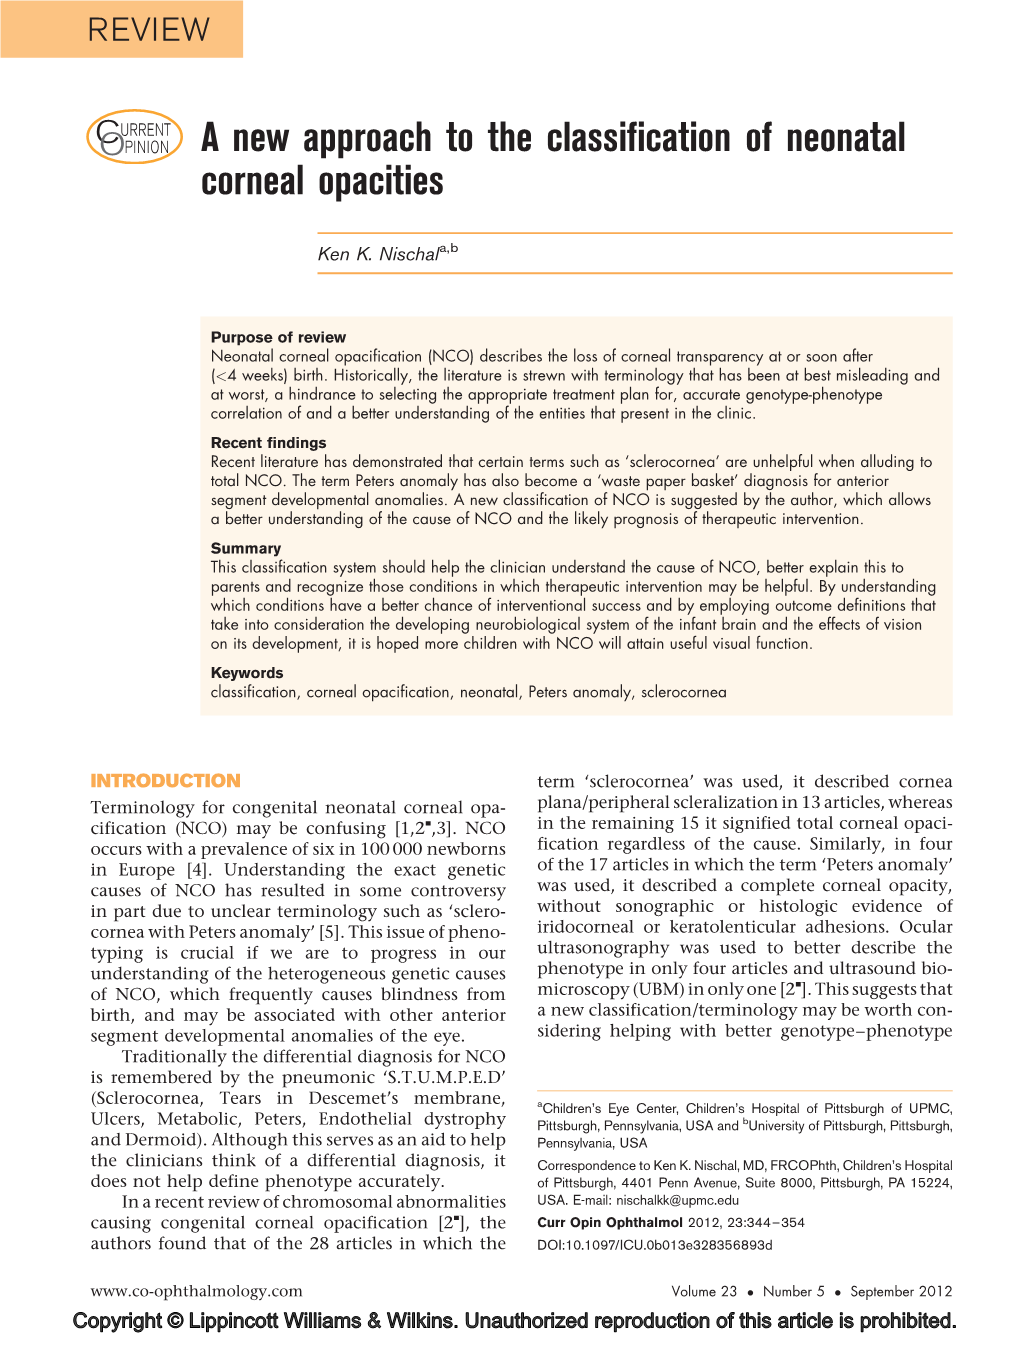 A New Approach to the Classification of Neonatal Corneal Opacities